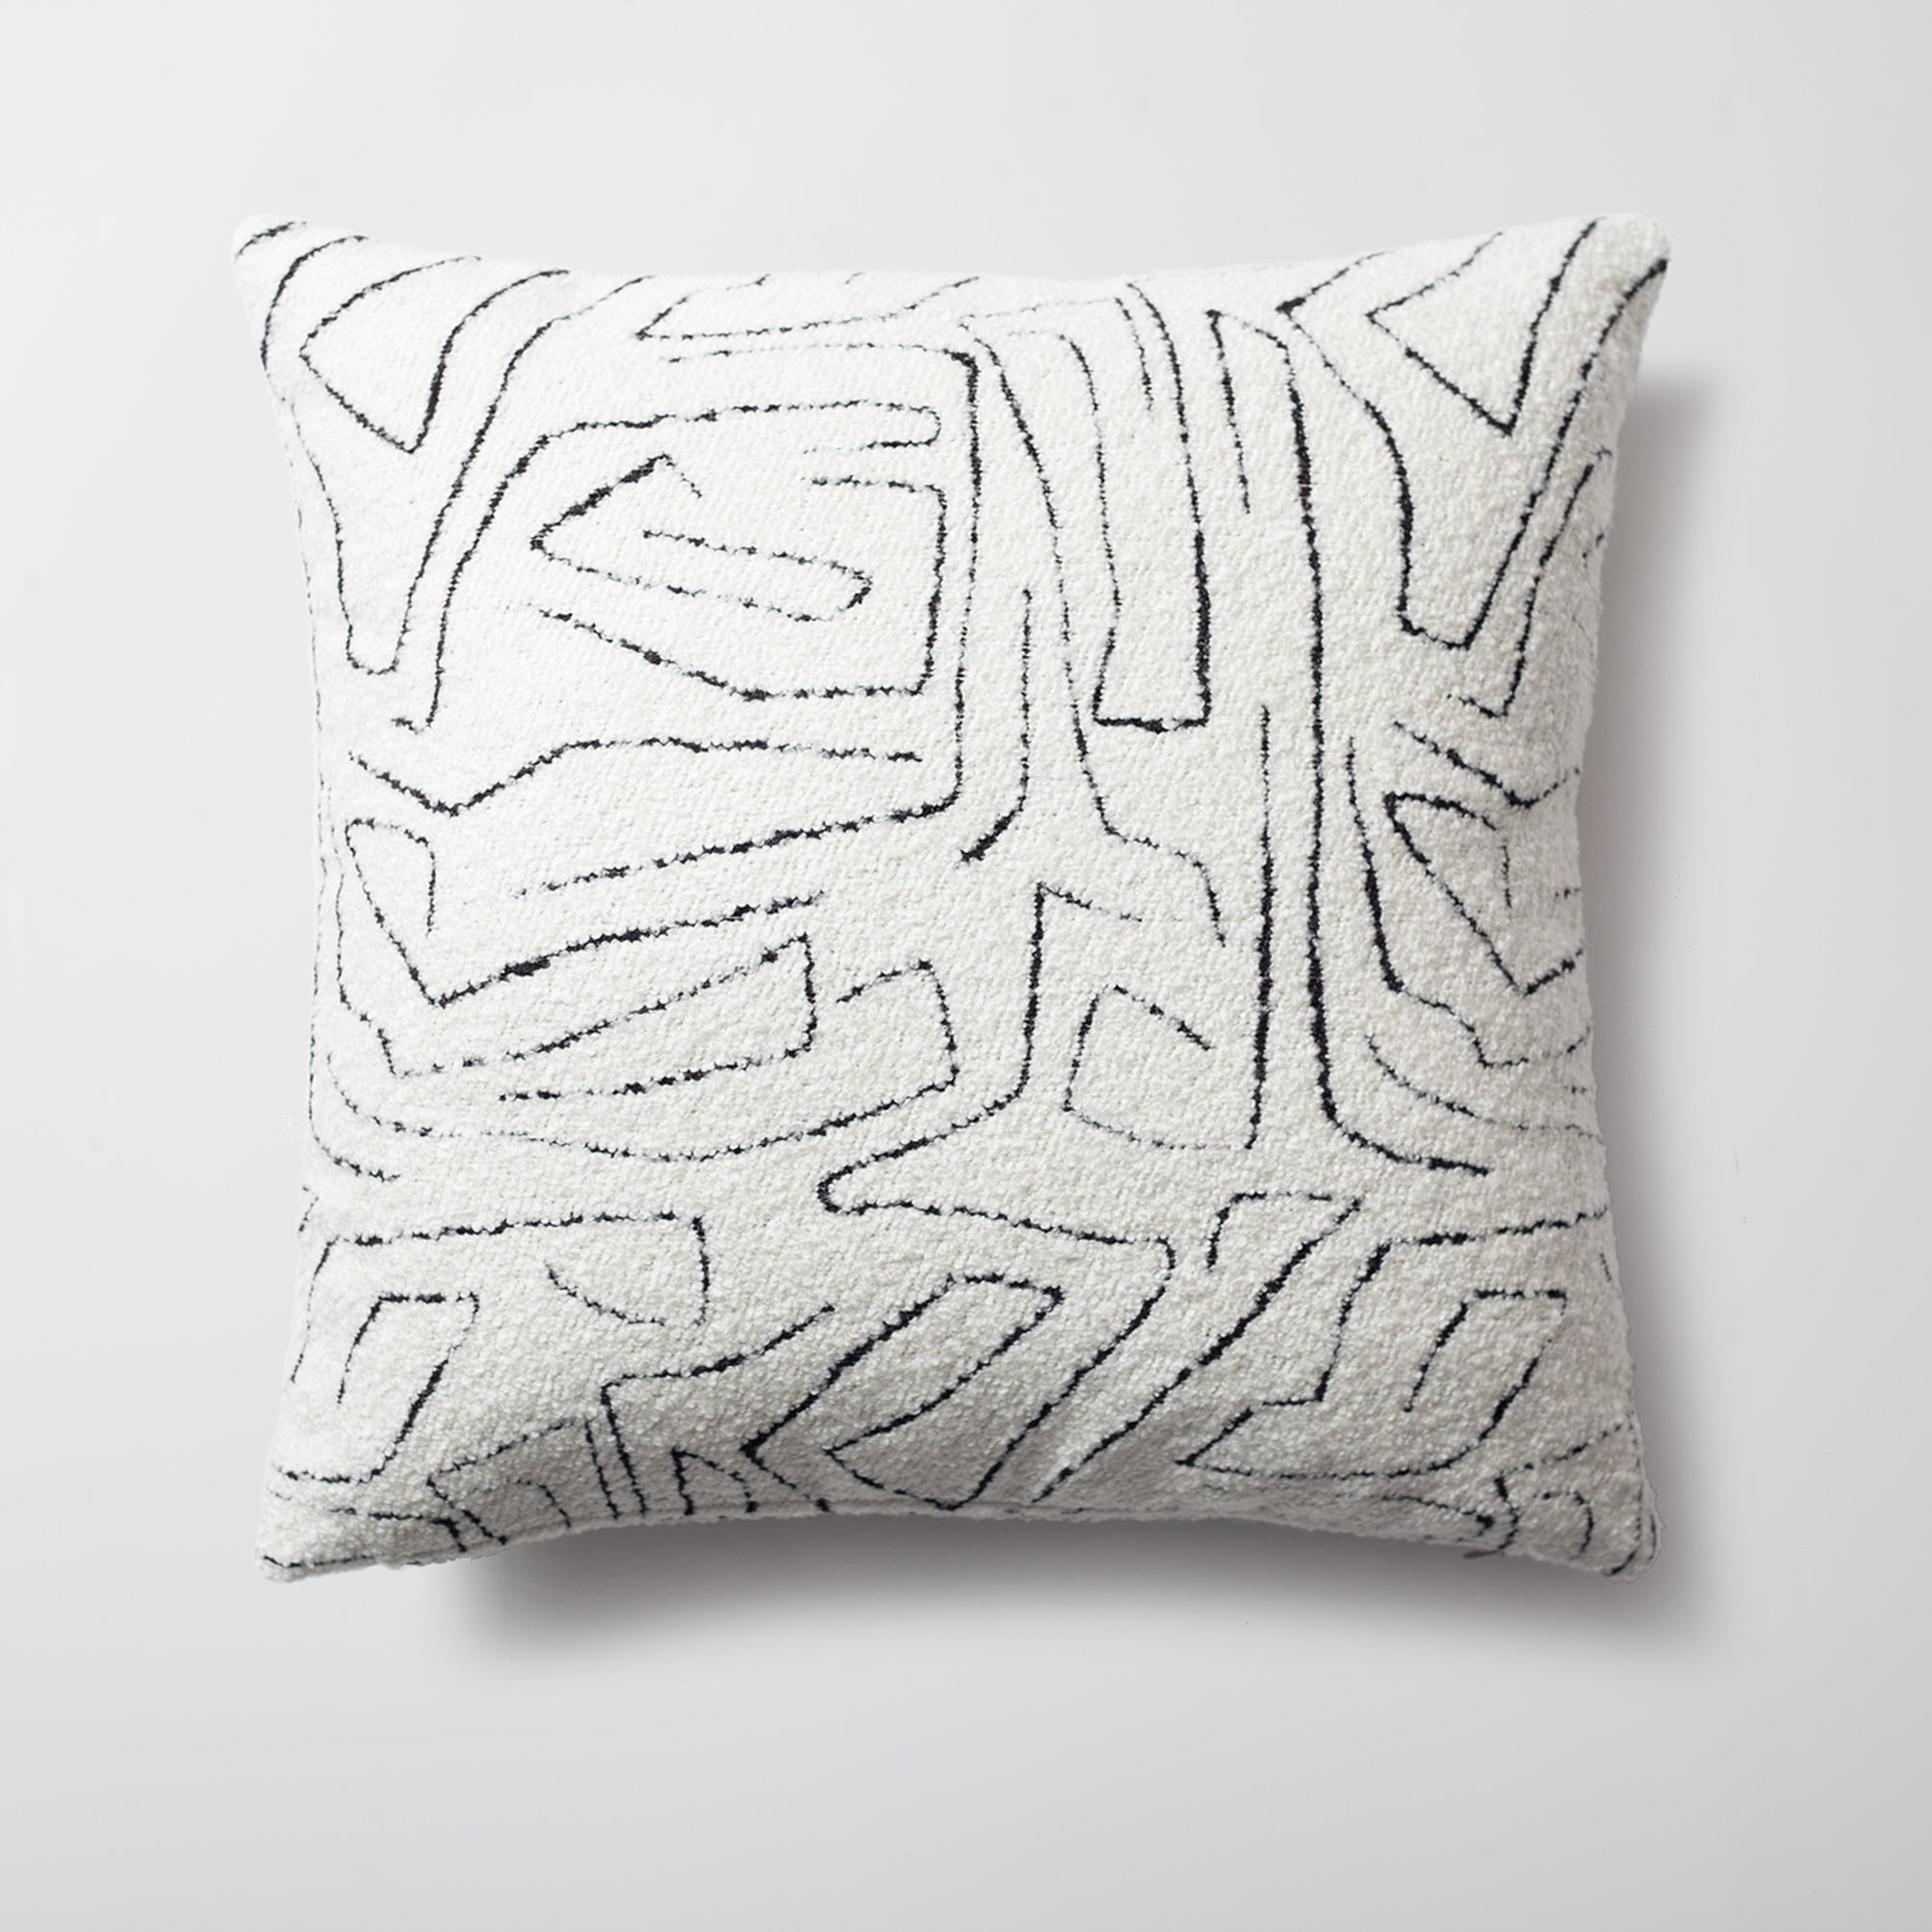 "Amorf" - Abstract Patterned 20x20 Inch Cushion - White and Black (Cover Only)